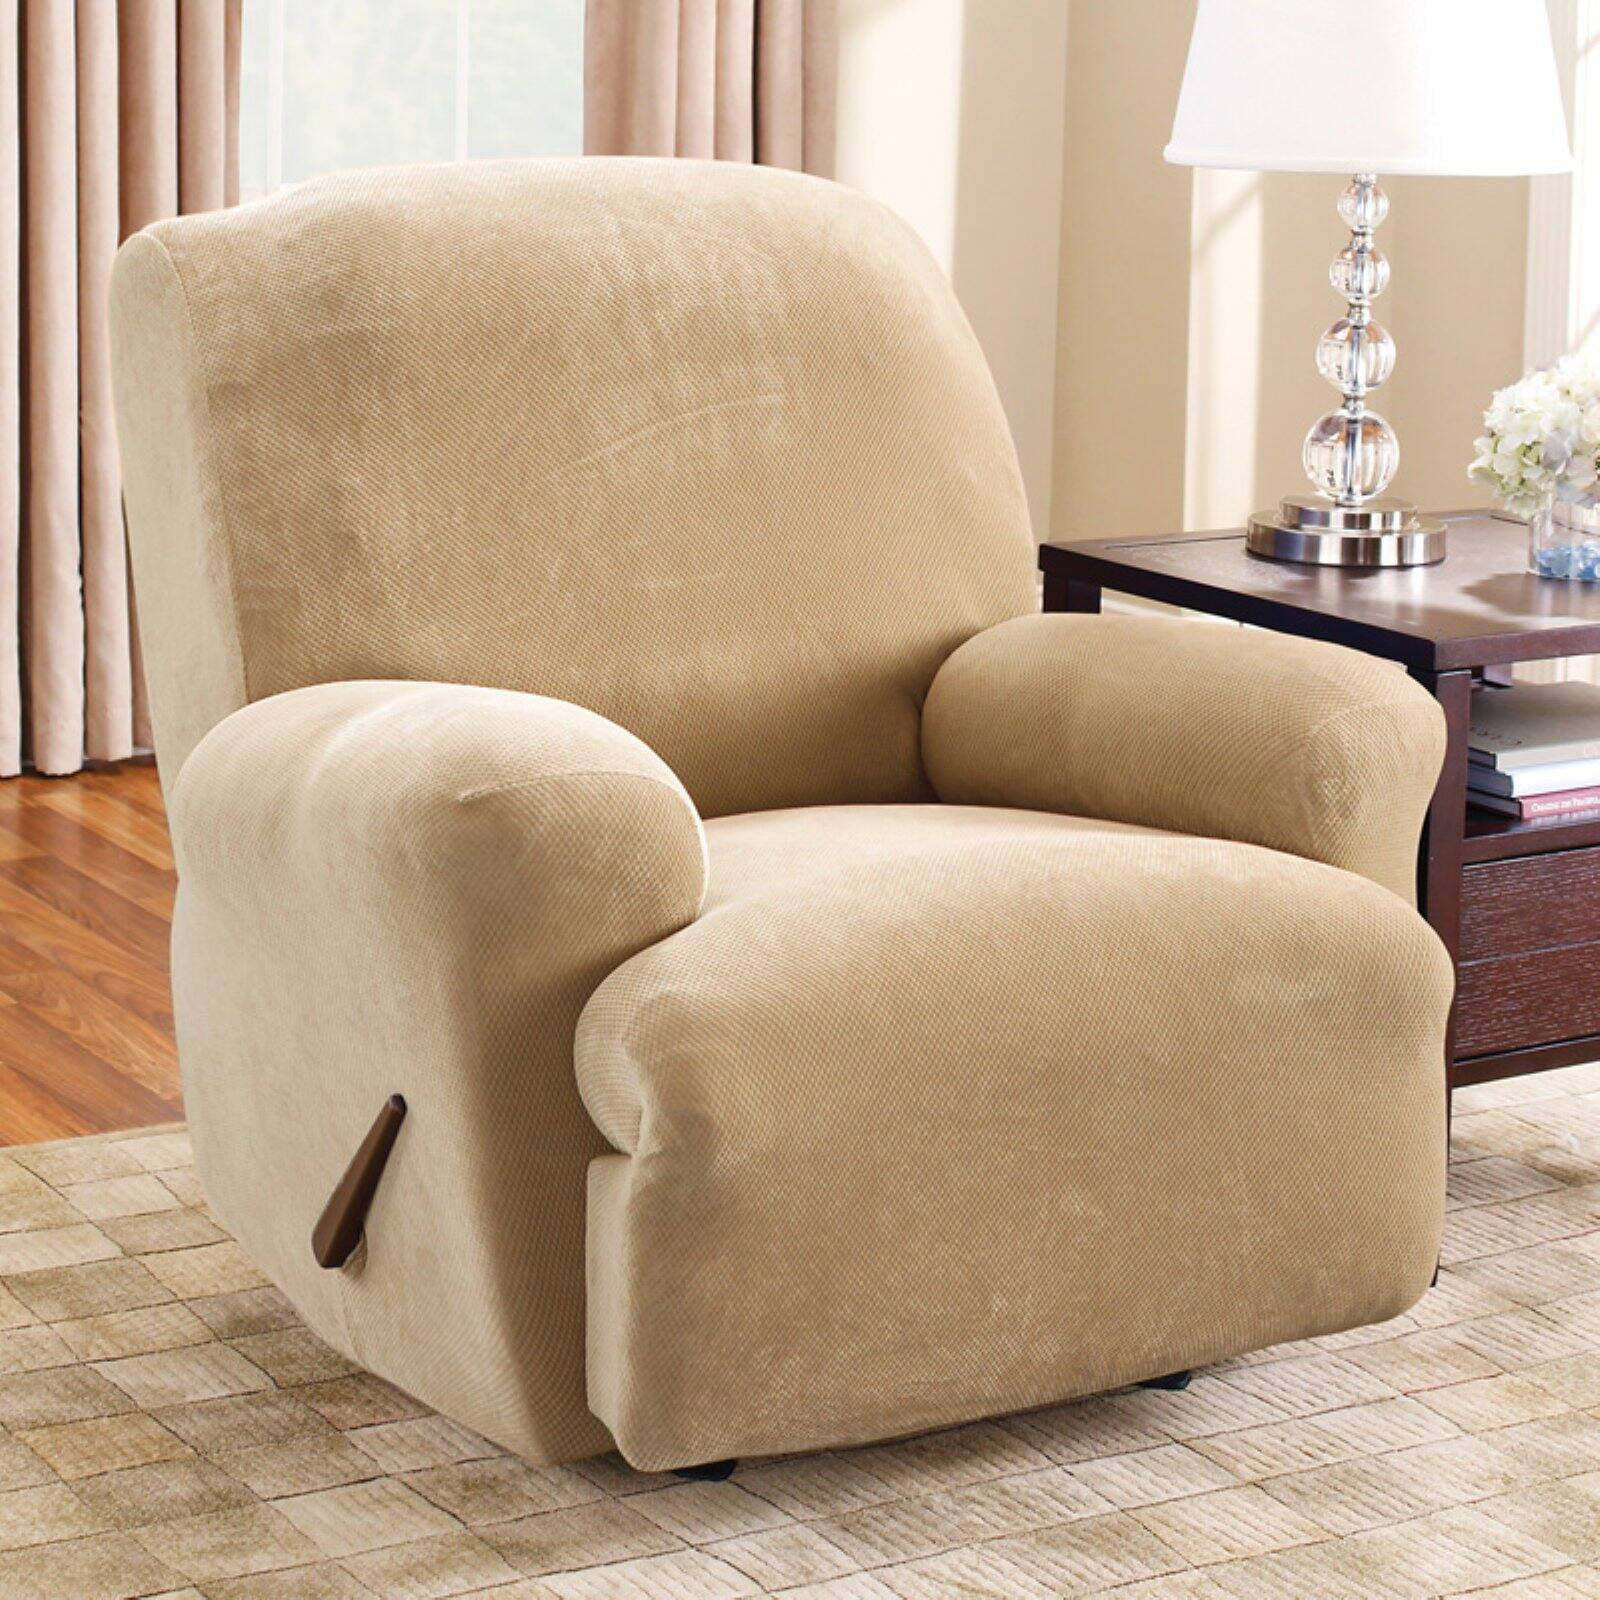 Olive Spandex Pique Stretch Form Fit Recliner Chair Lazy Boy Cover Slipcover 